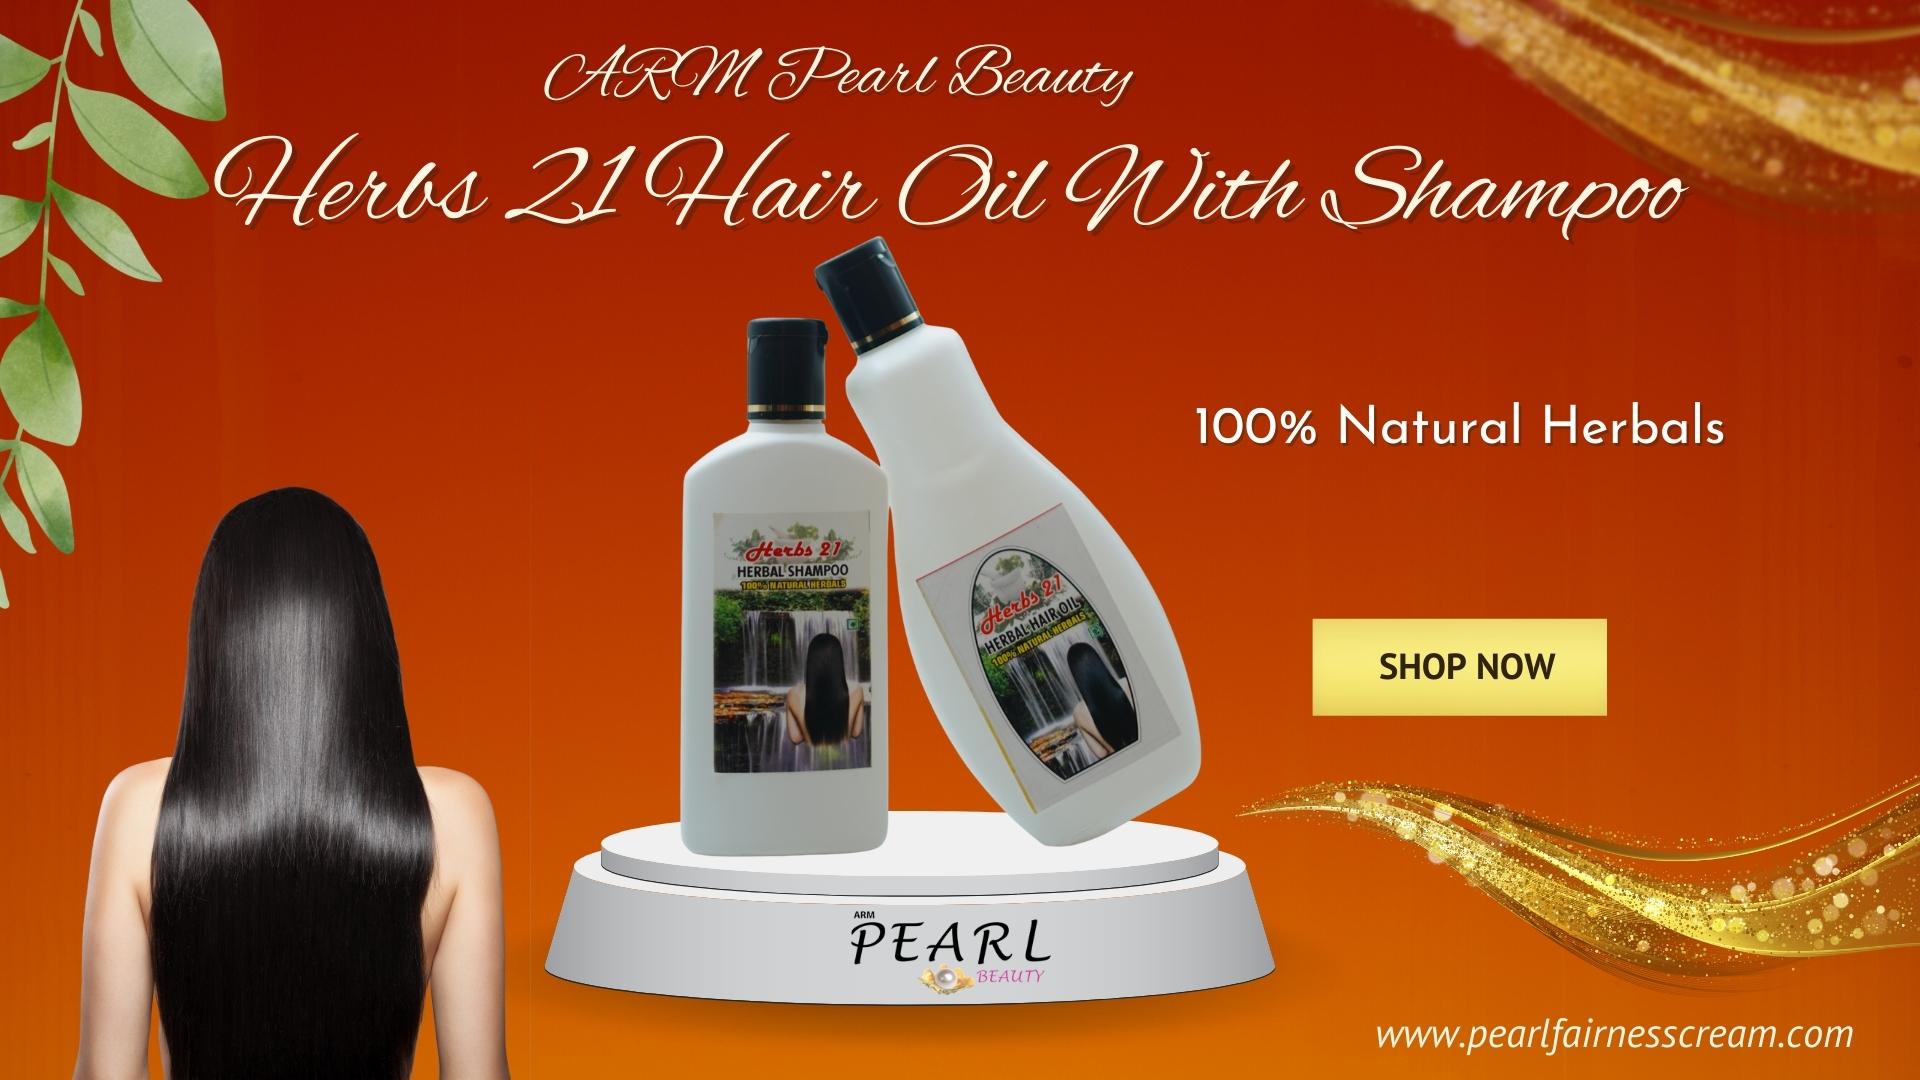 Best Hair Oil For Hair Growth And Thickness Buy Now - Pearl Fairness Cream